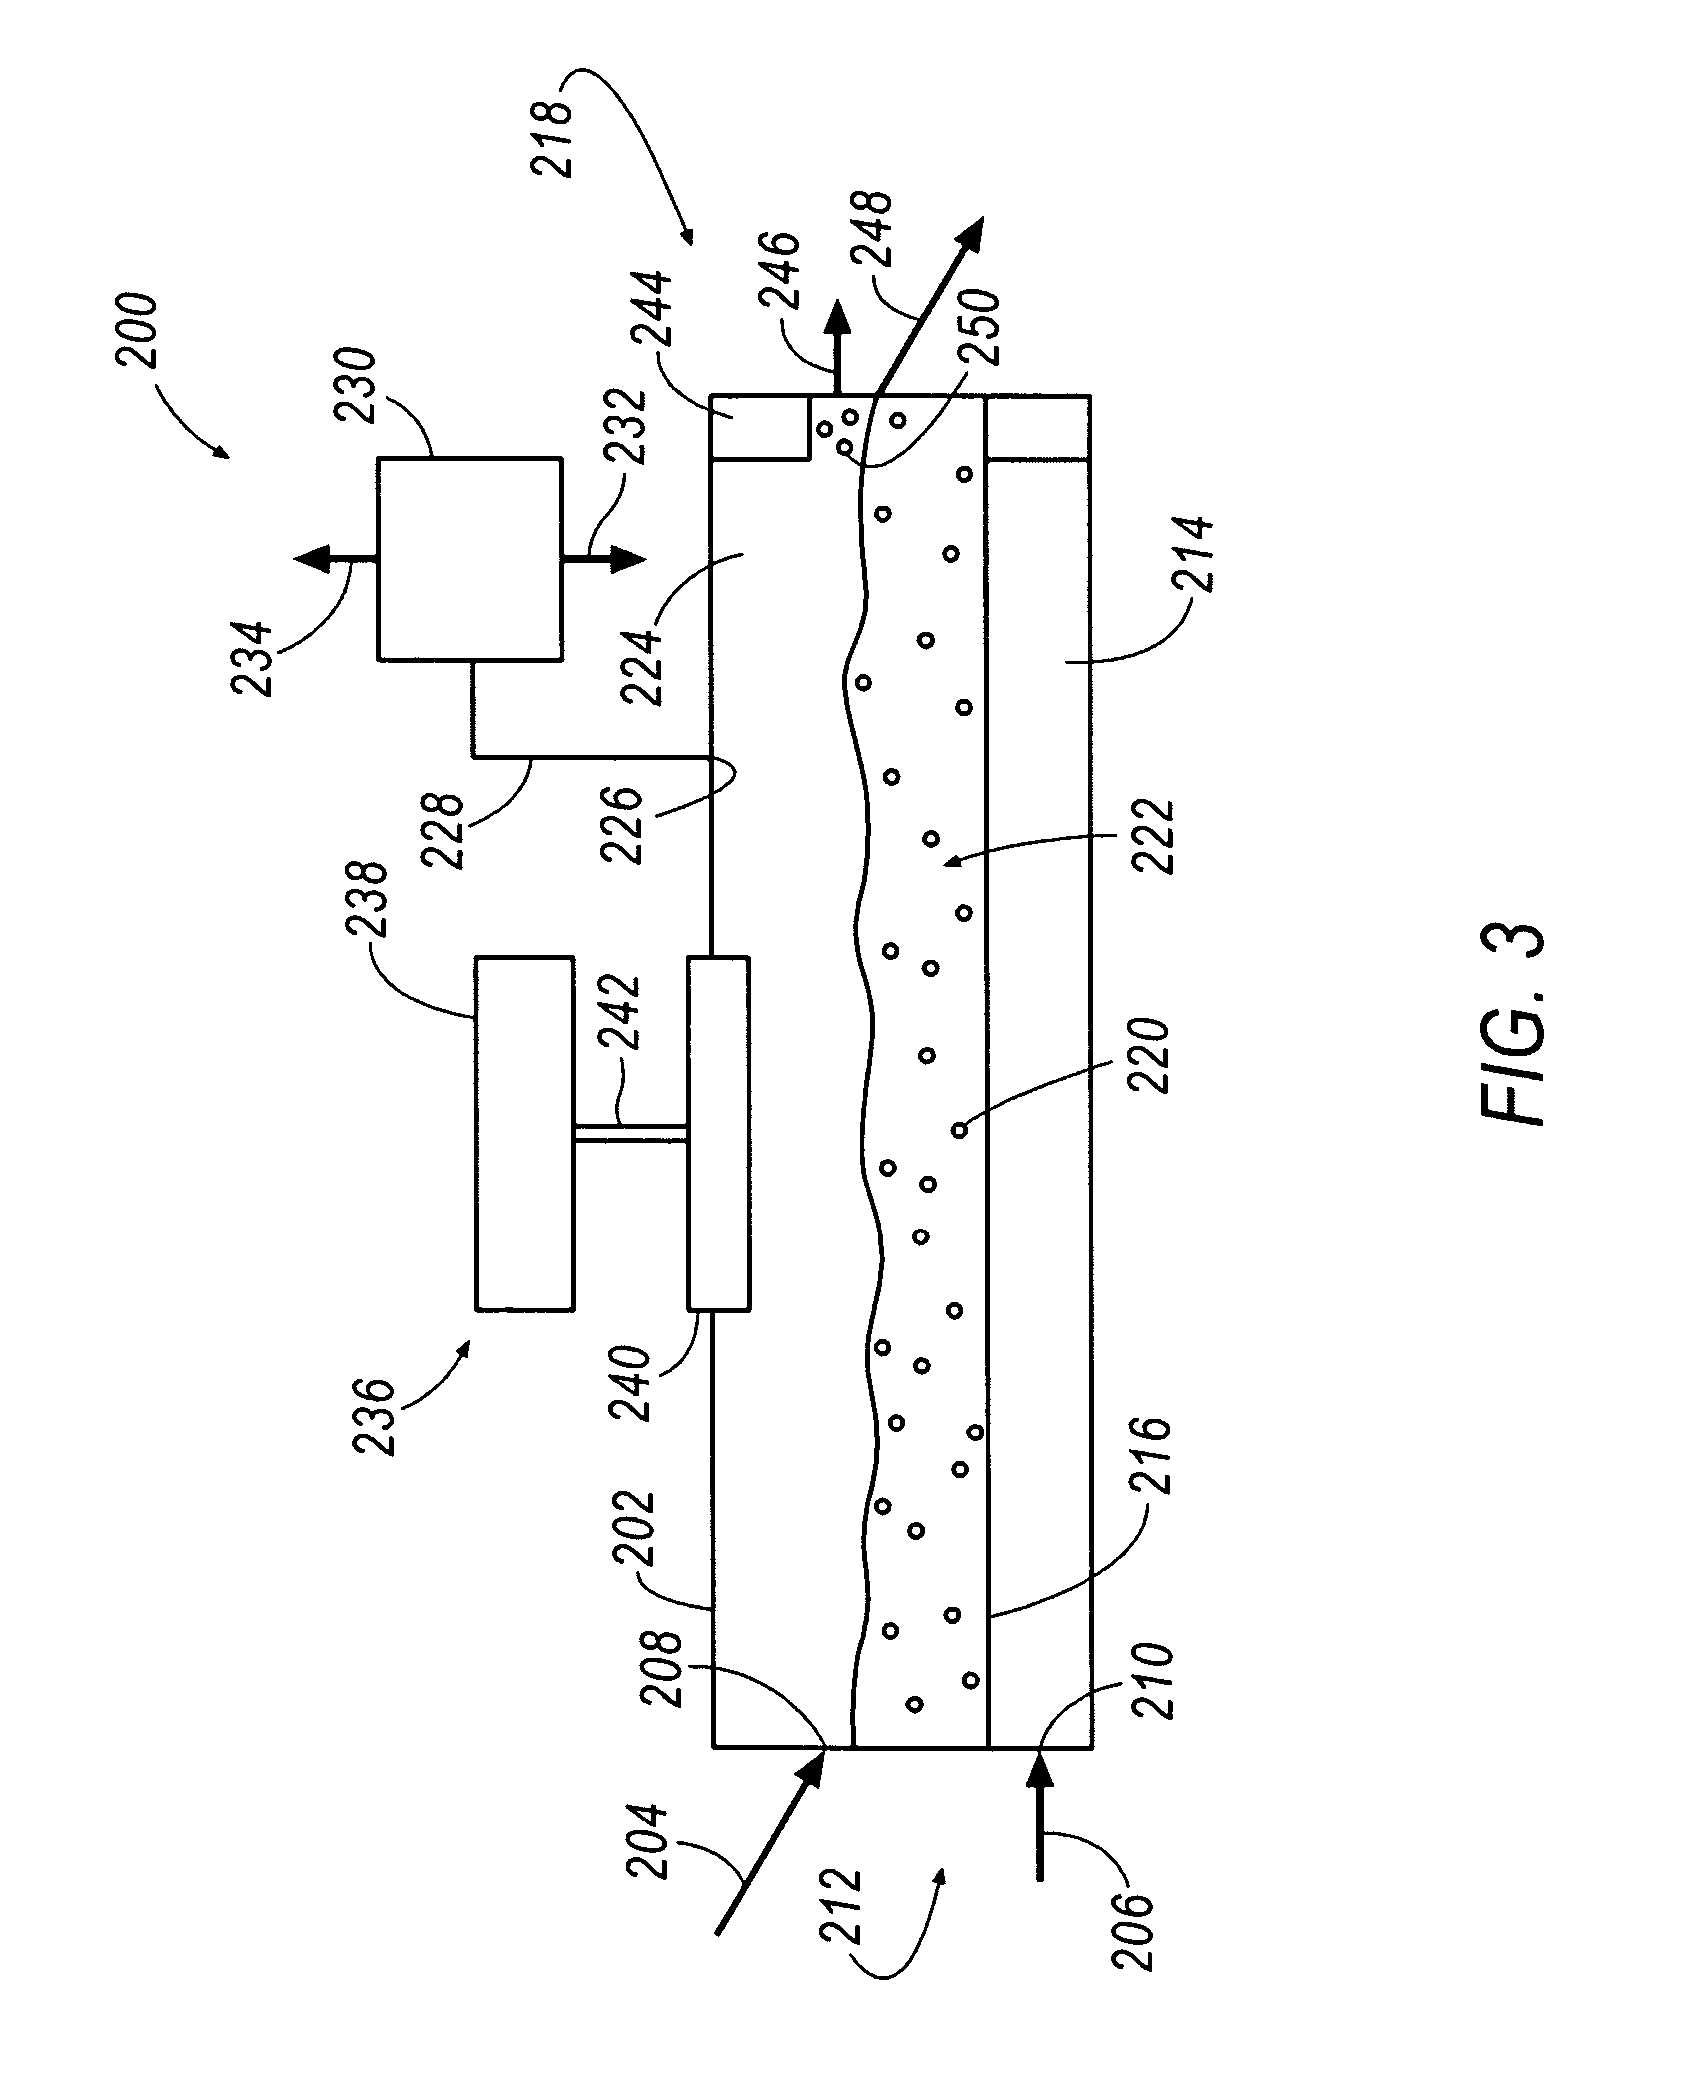 Method for separating metal values by exposing to microwave/millimeter wave energy